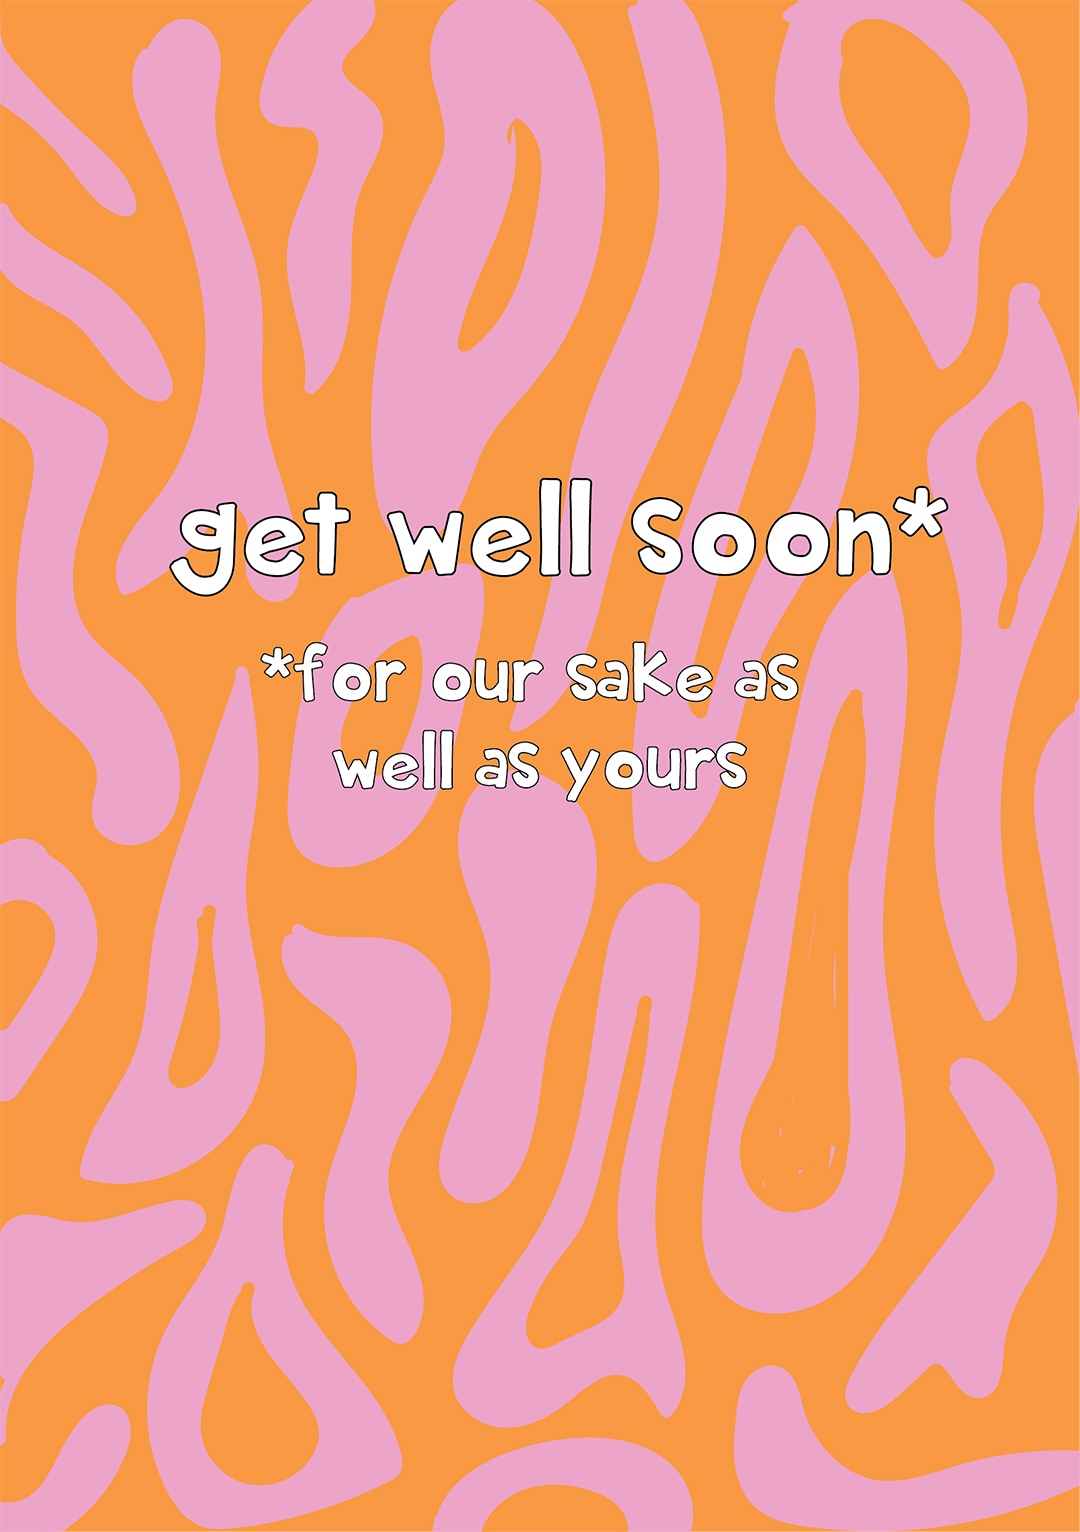 Get Well Soon *For our sake as well as yours